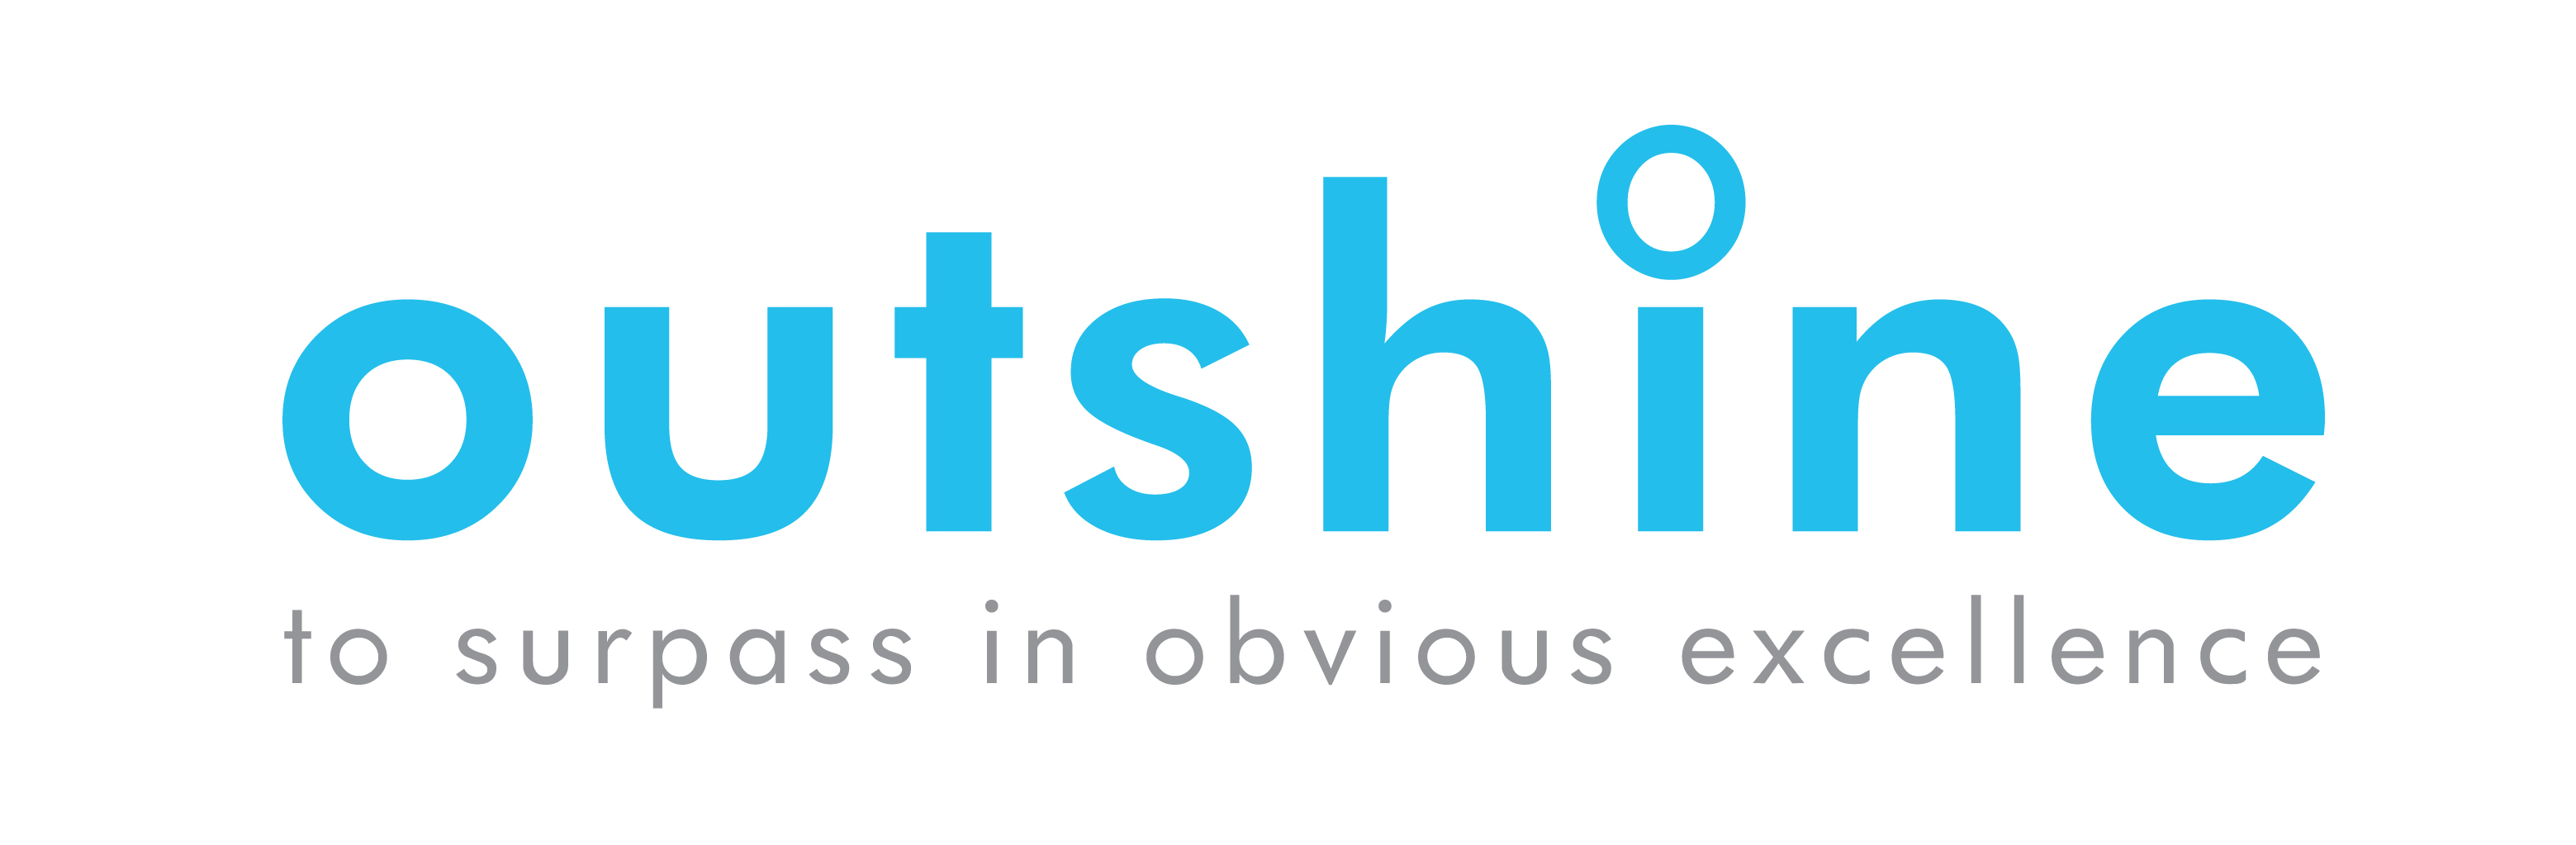 
Outshine Limited